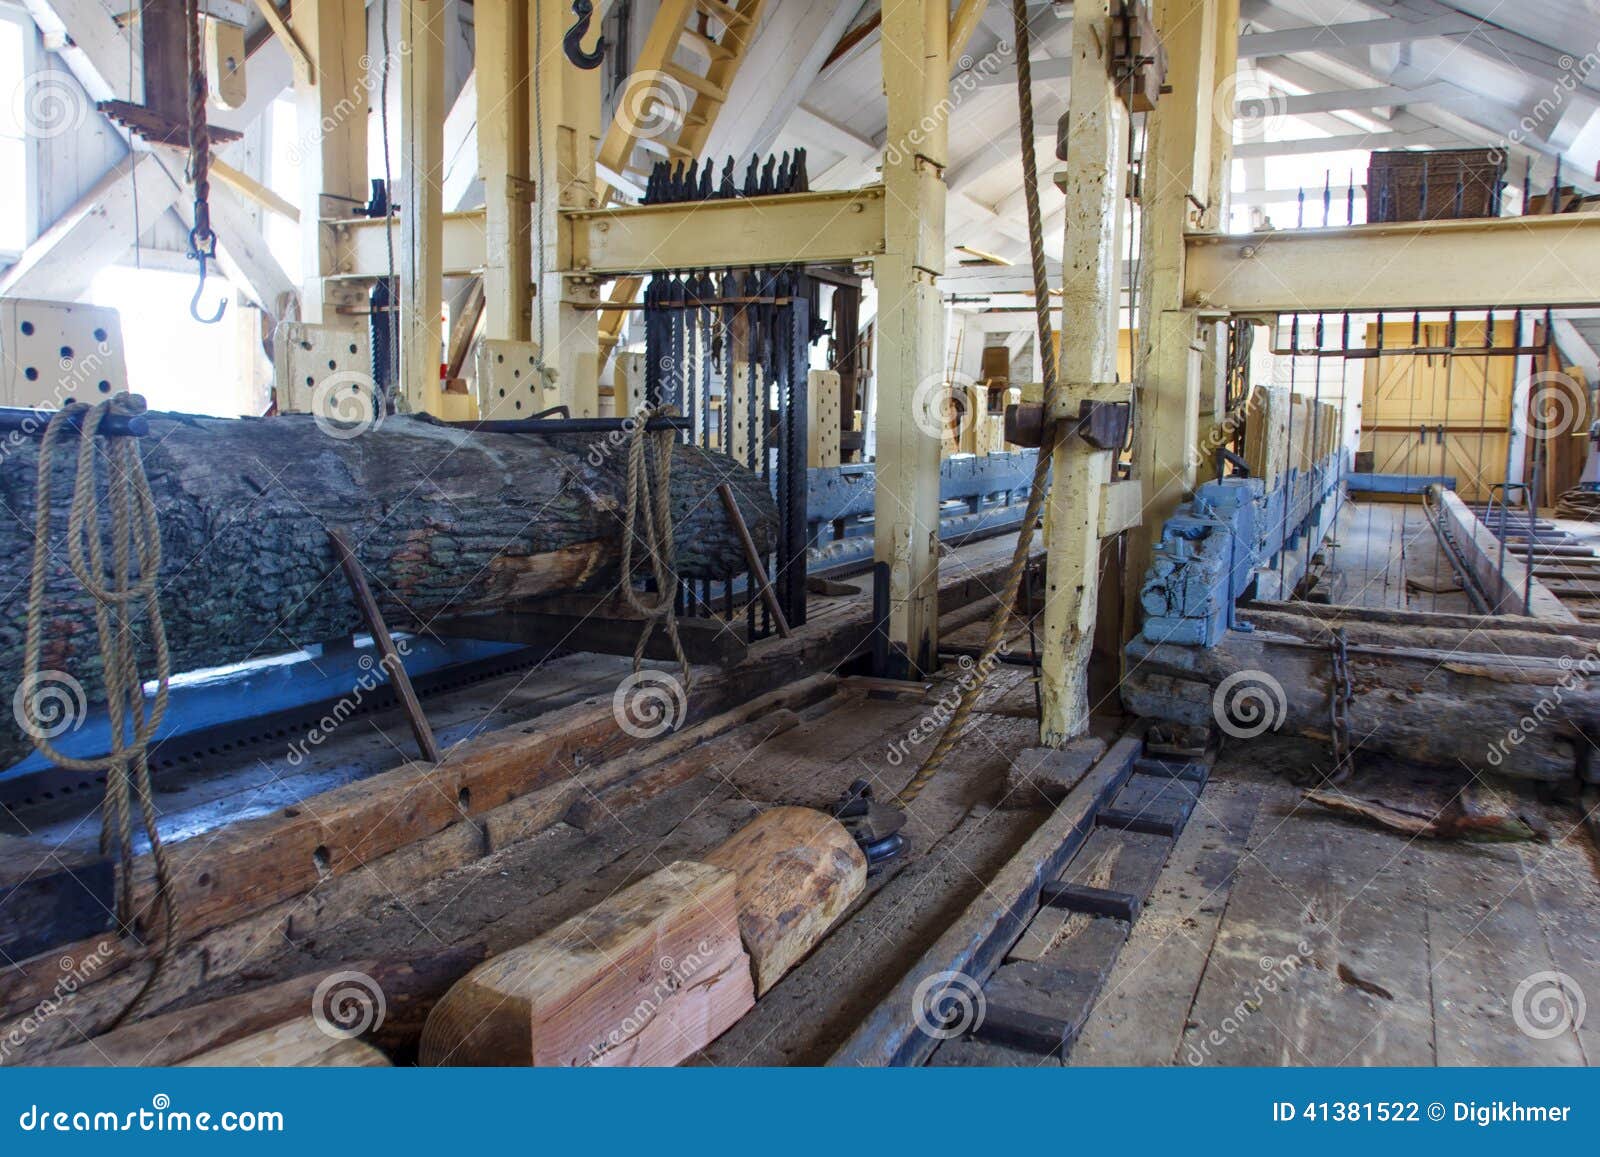 Interior of a sawmill, a facility where logs are cut into lumber or 